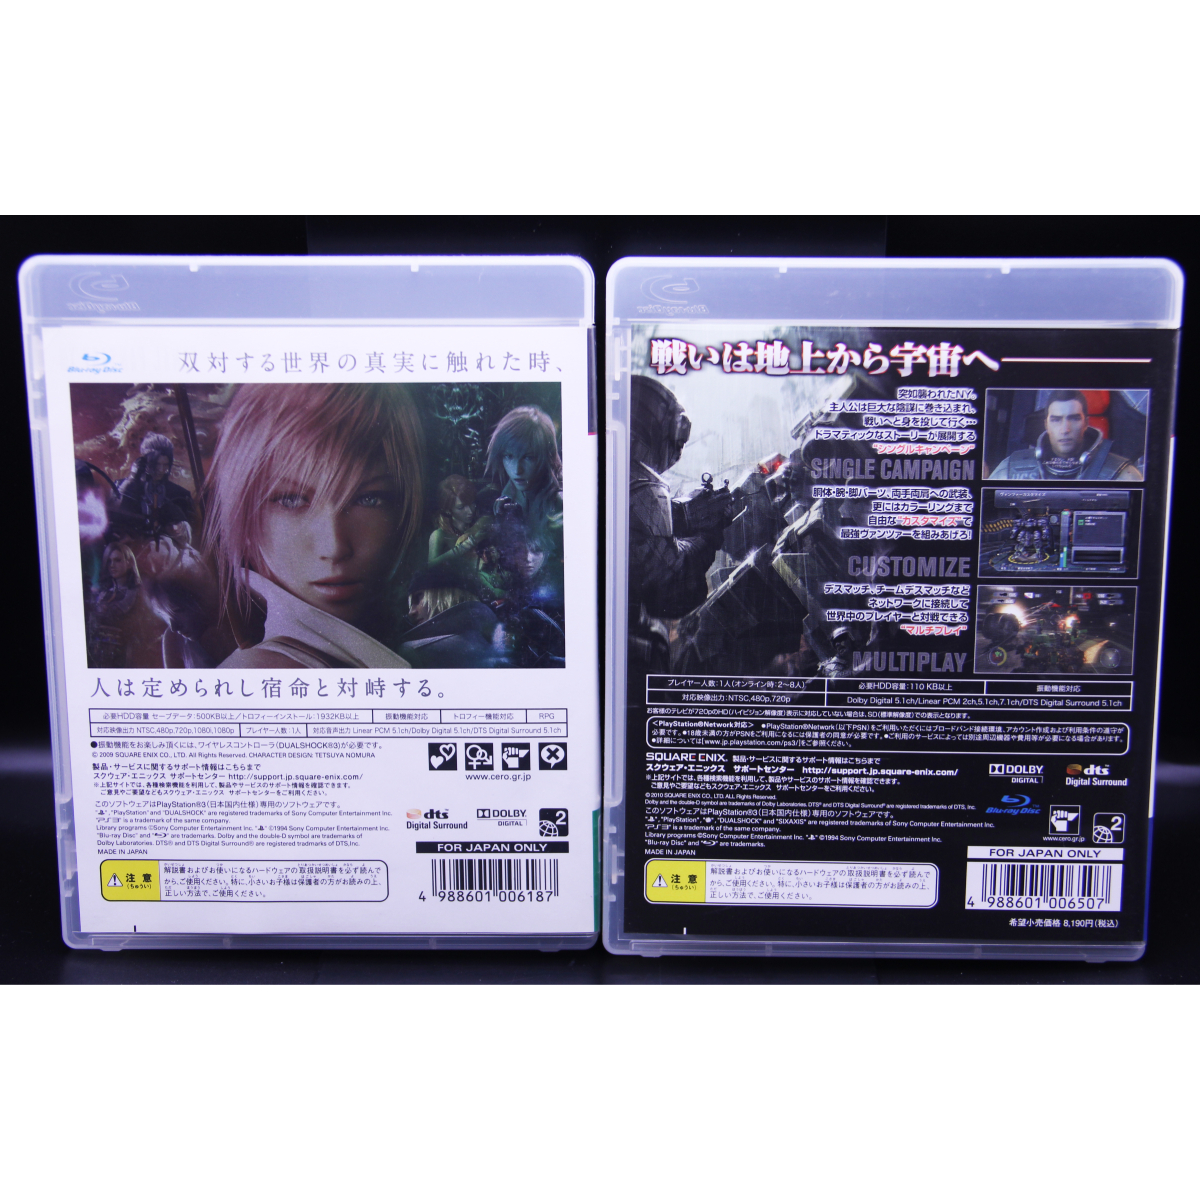 PS3 4本セット FINAL FANTASY XIII/フロントミッションエボルヴ/ビートスケッチ/機動戦士ガンダム EXTREMEVs.【送料無料・追跡付き発送】_画像2